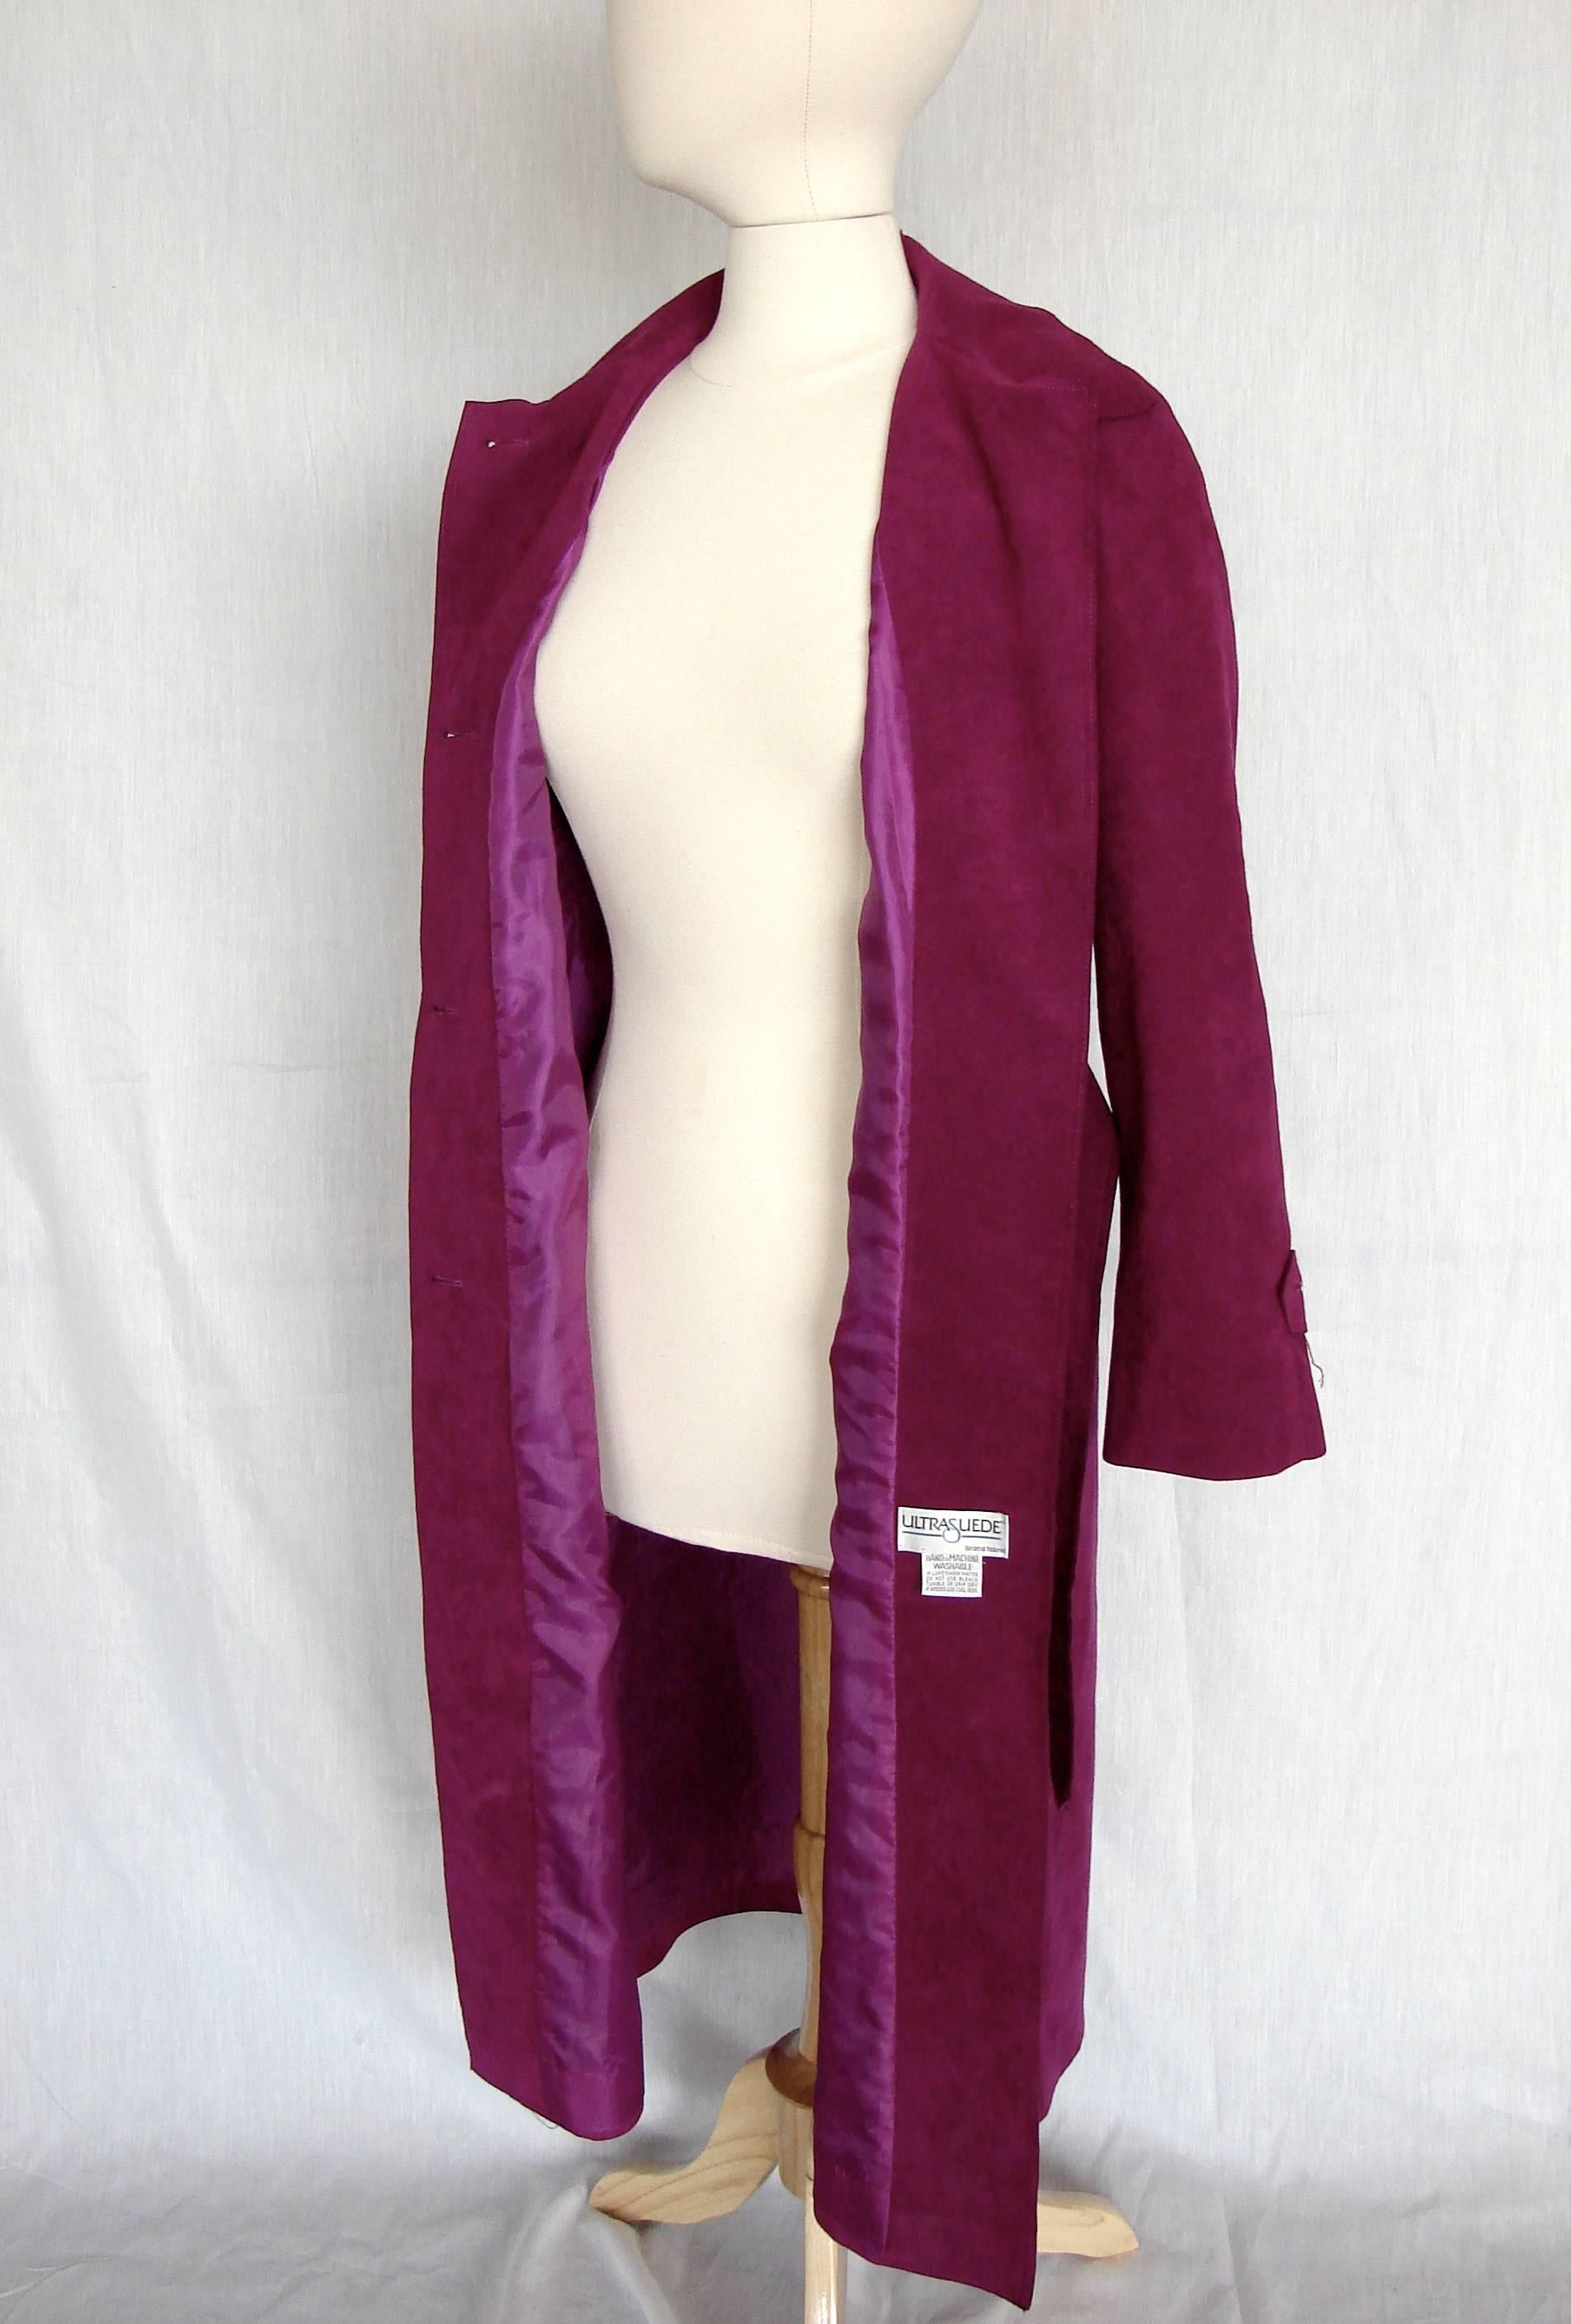 Women's Lilli Ann Vibrant Magenta Ultrasuede Belted Trench Coat Size M 1970s